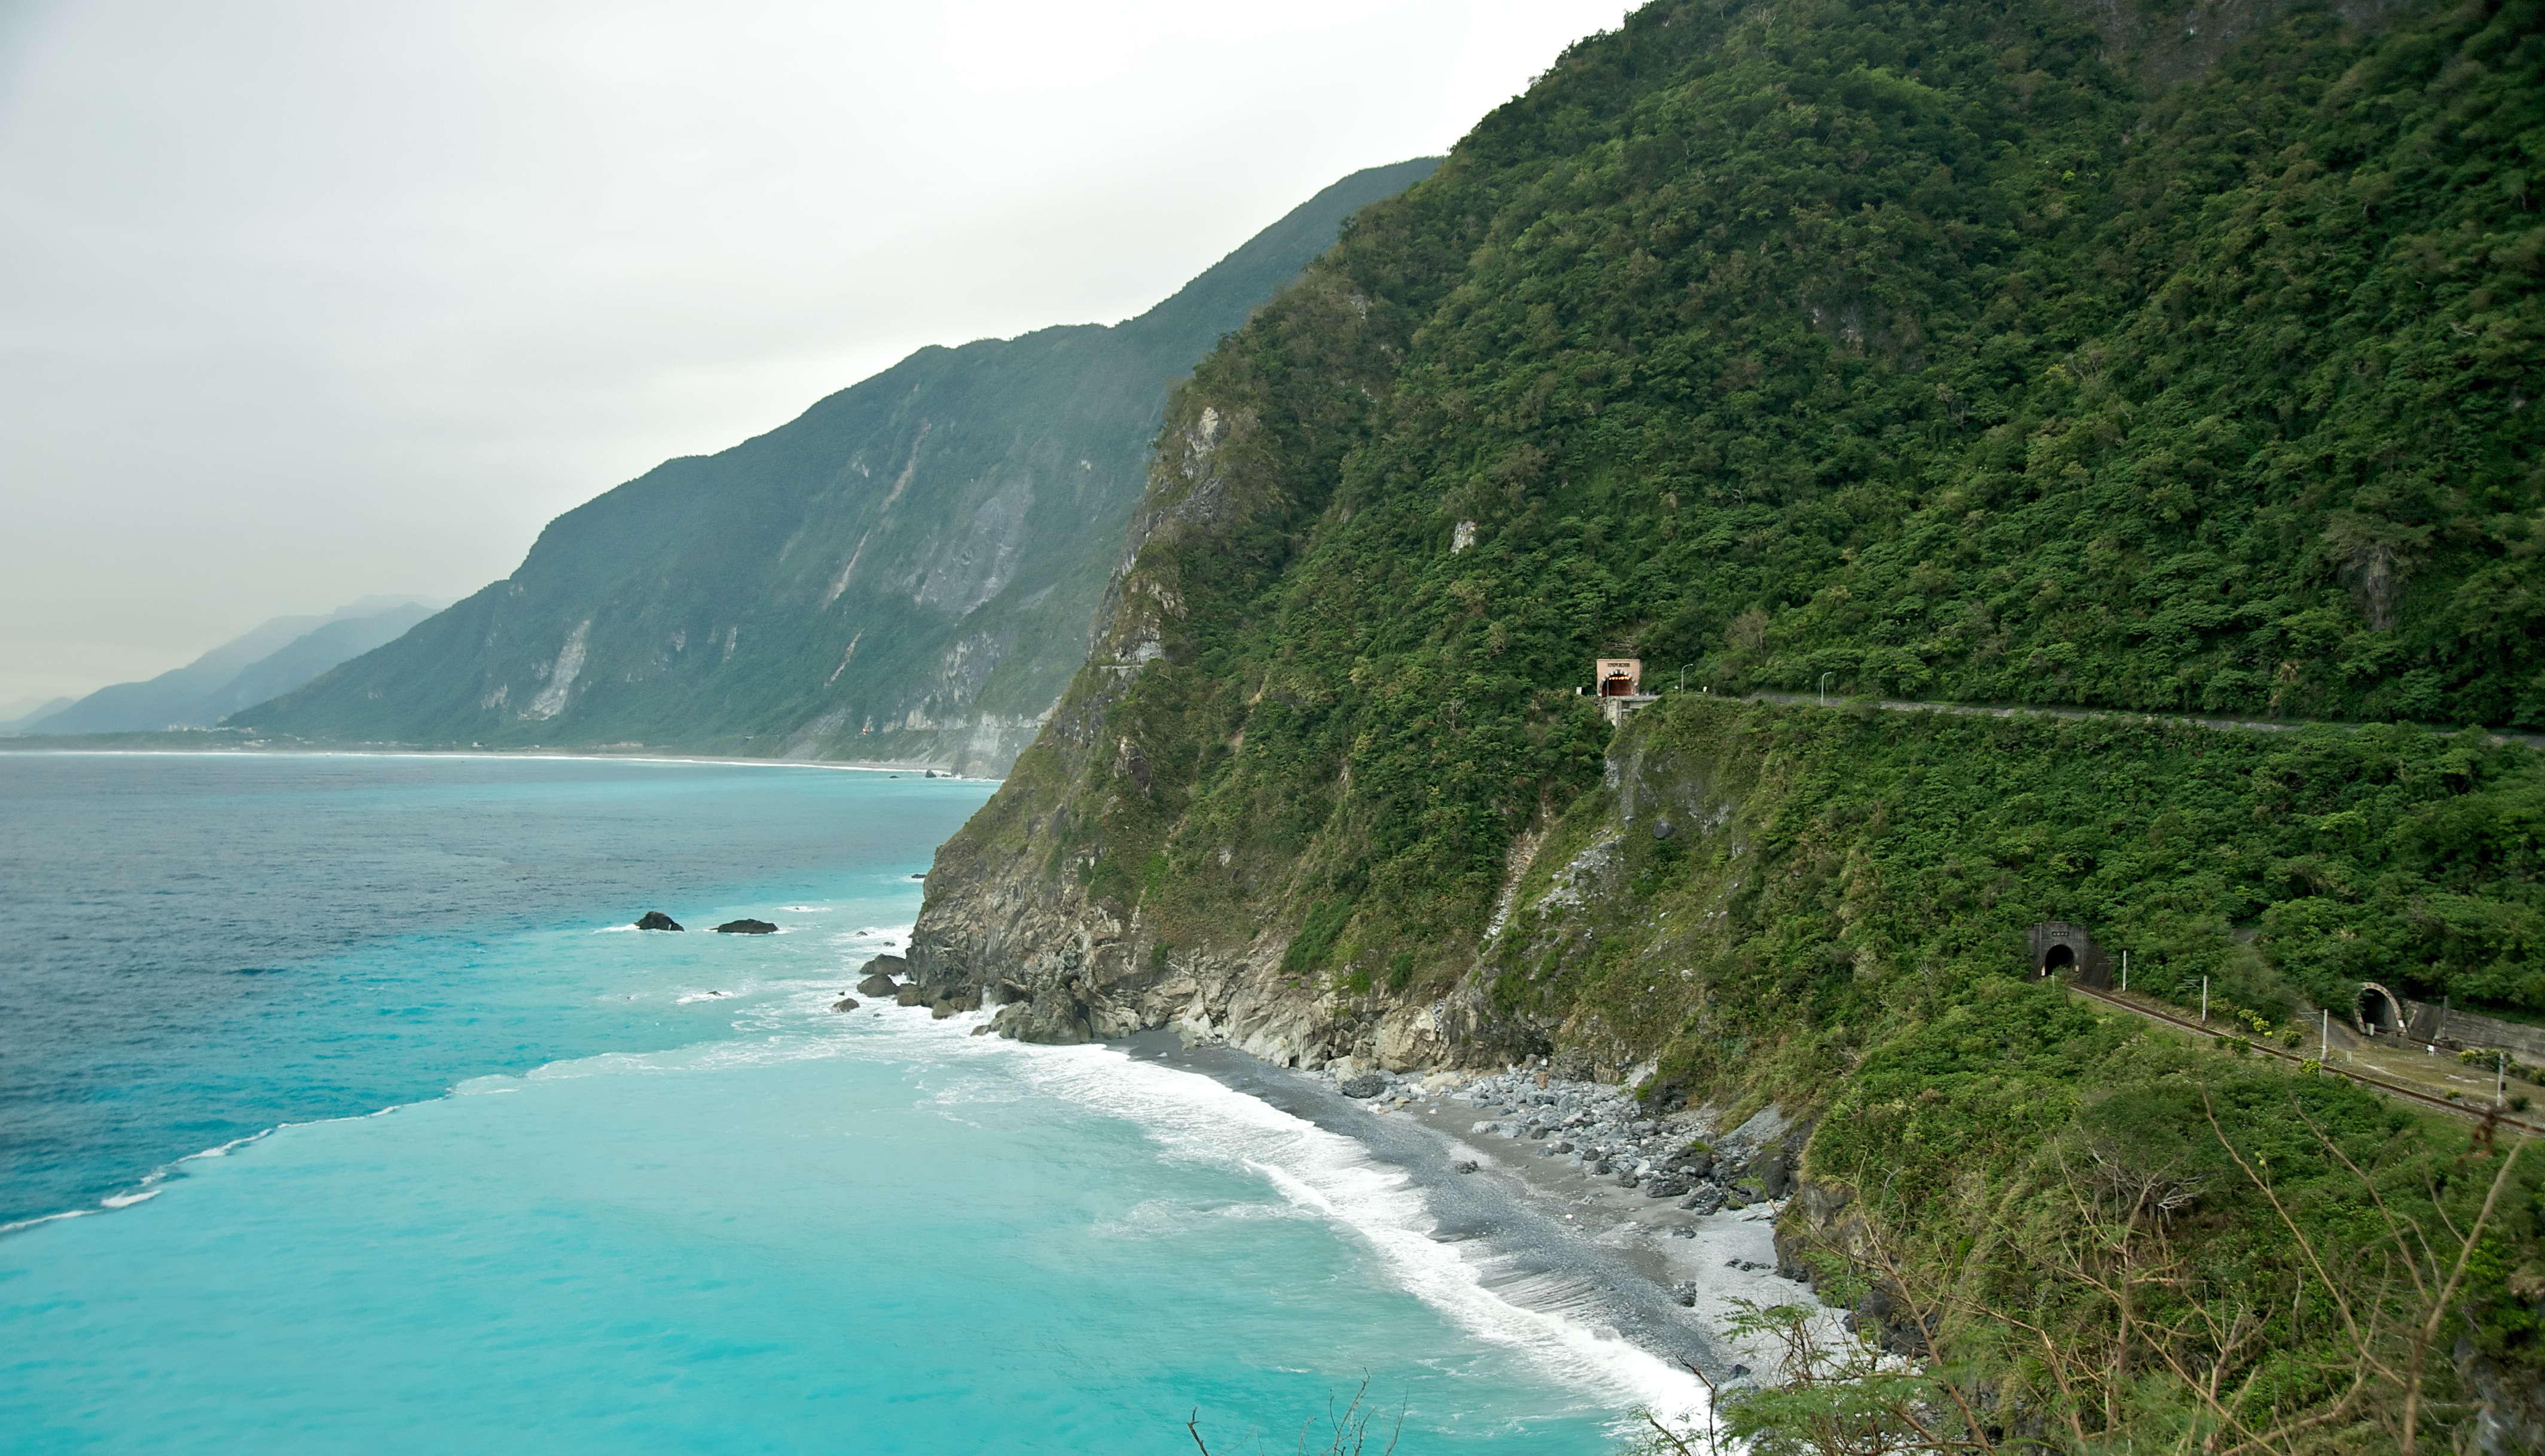 Taiwan 2009 CingShui Cliffs on SuHua Highway FRD 6762 Pano Extracted